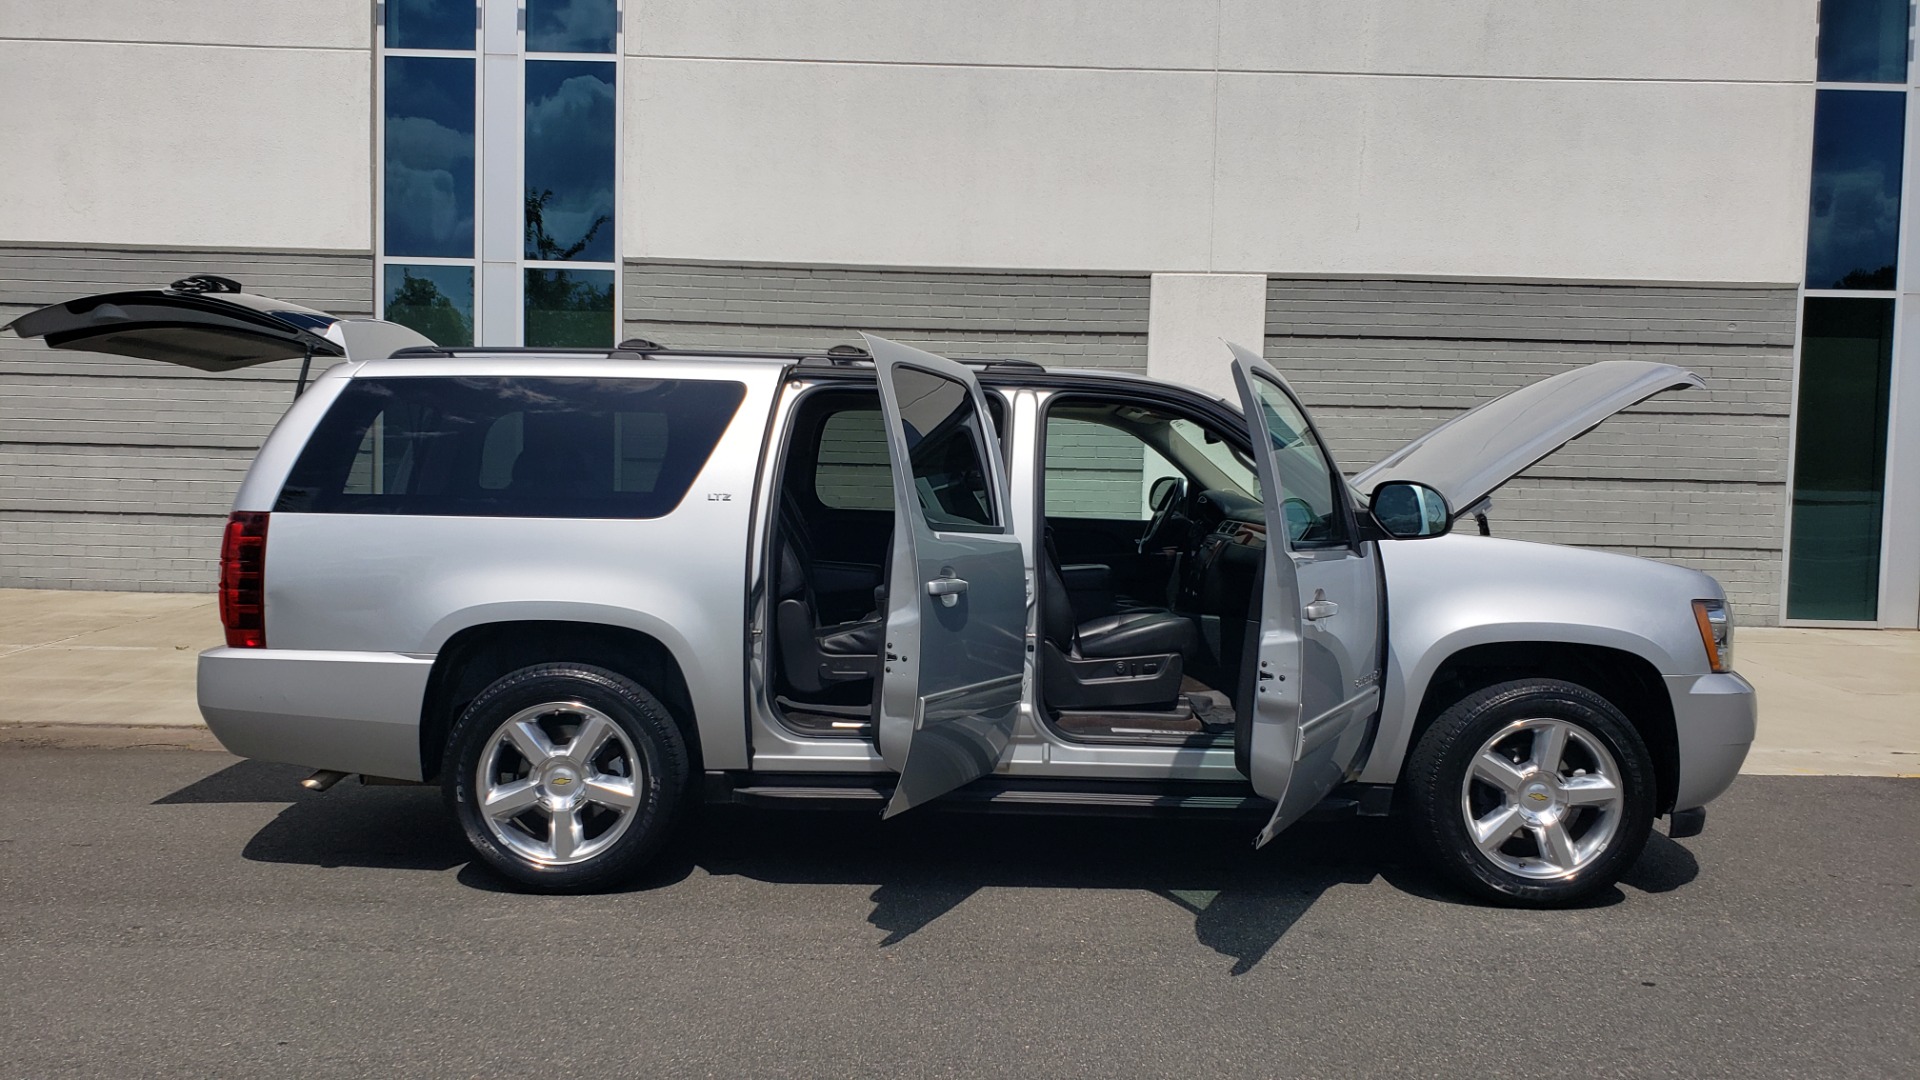 Used 2012 Chevrolet SUBURBAN LTZ 4WD / NAV / SUNROOF / BOSE / ENTERTAINMENT / 3-ROWS / REARVIEW for sale Sold at Formula Imports in Charlotte NC 28227 16